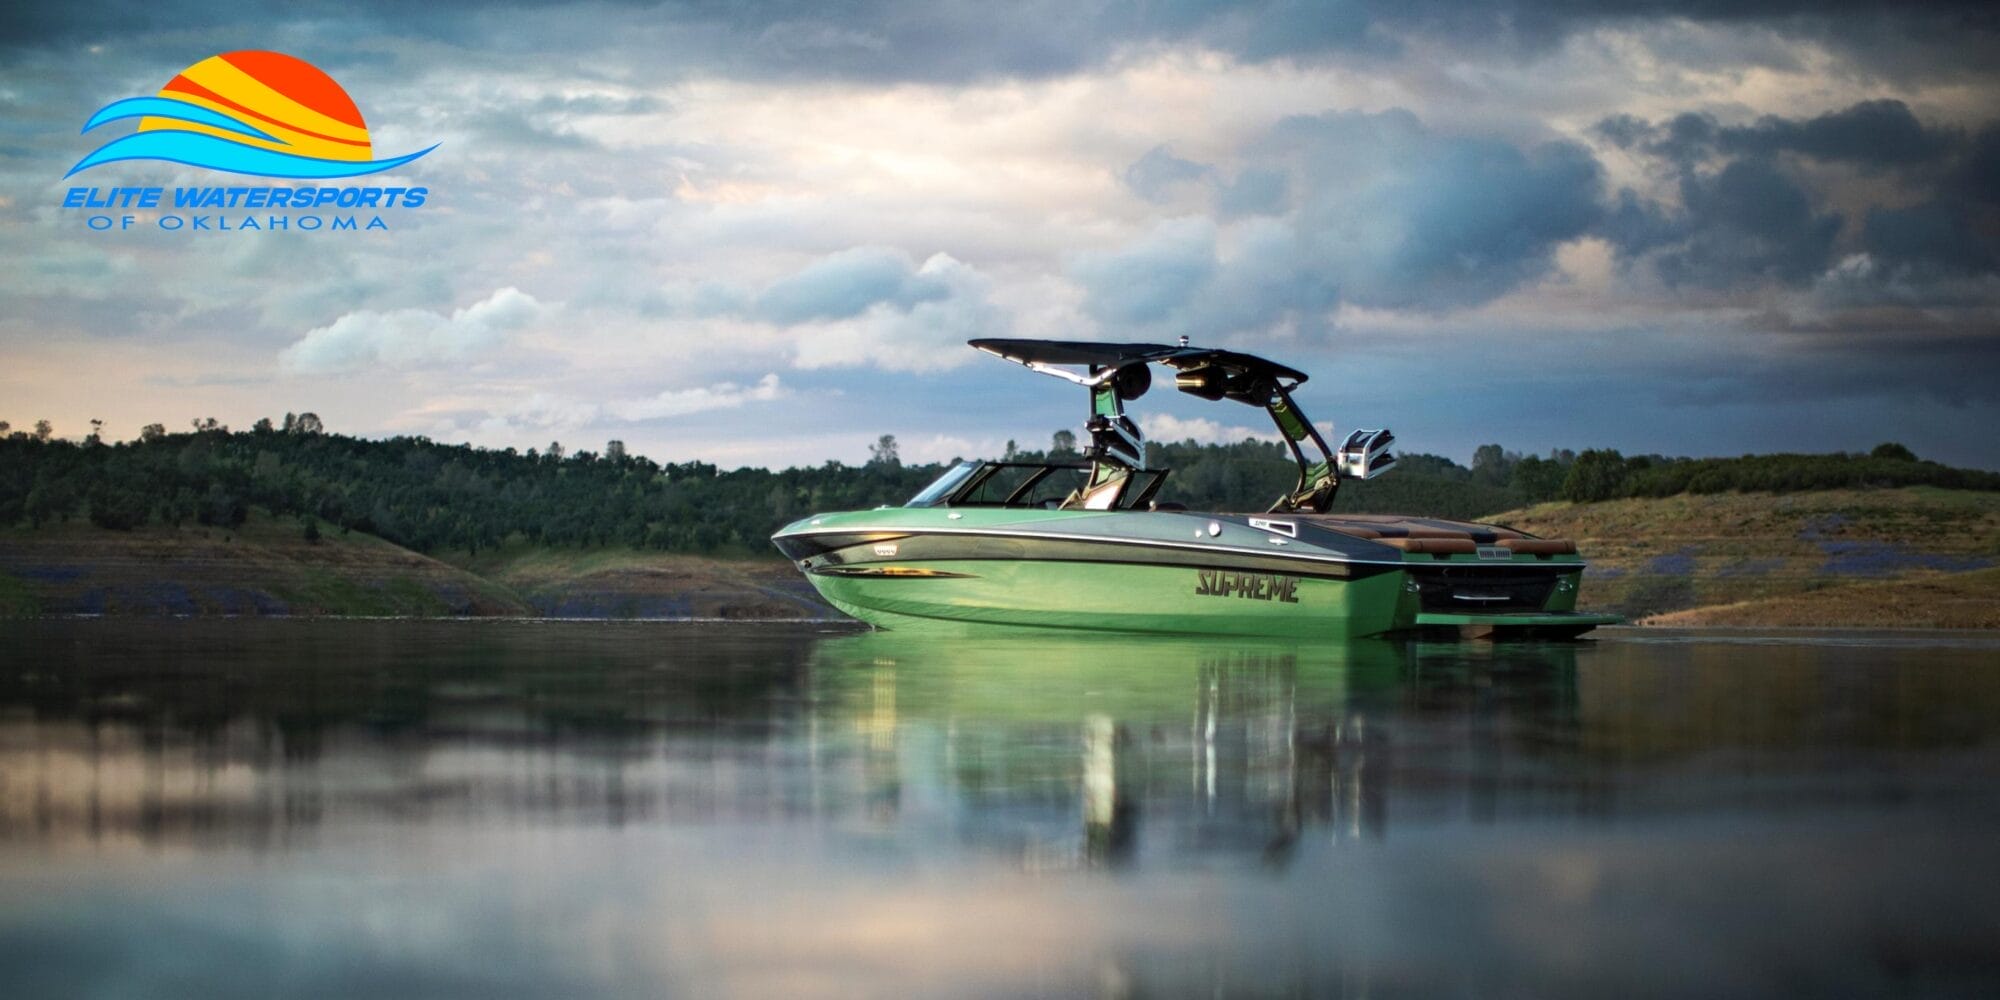 A Supreme-branded boat floats on a calm lake with hilly terrain in the background, showcasing the quality synonymous with Centurion. The Elite Watersports of Oklahoma logo is prominently displayed in the upper left corner.